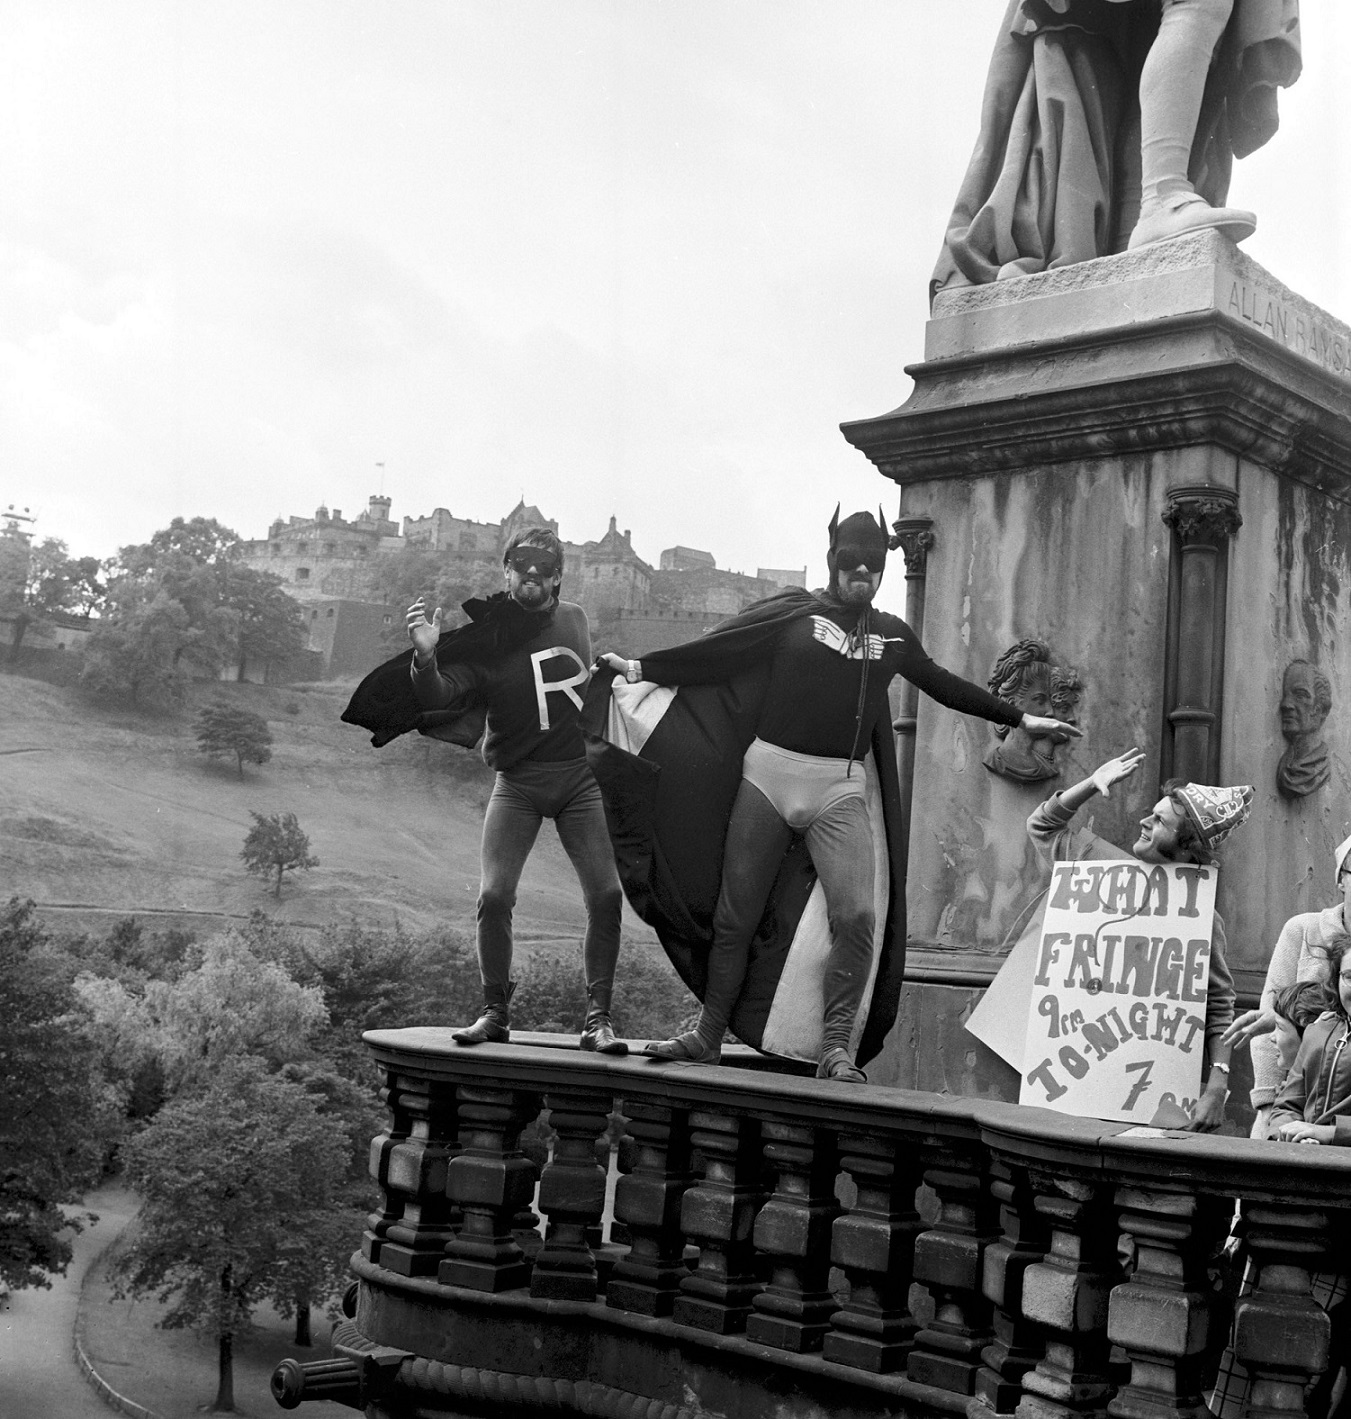 A black and white archive photo from the Edinburgh Festival. You can see two people standing on a statue in Princes Street Gardens dressed as Batman and Robin. Batman is pointing to a a man holding a sign saying "What Fringe"